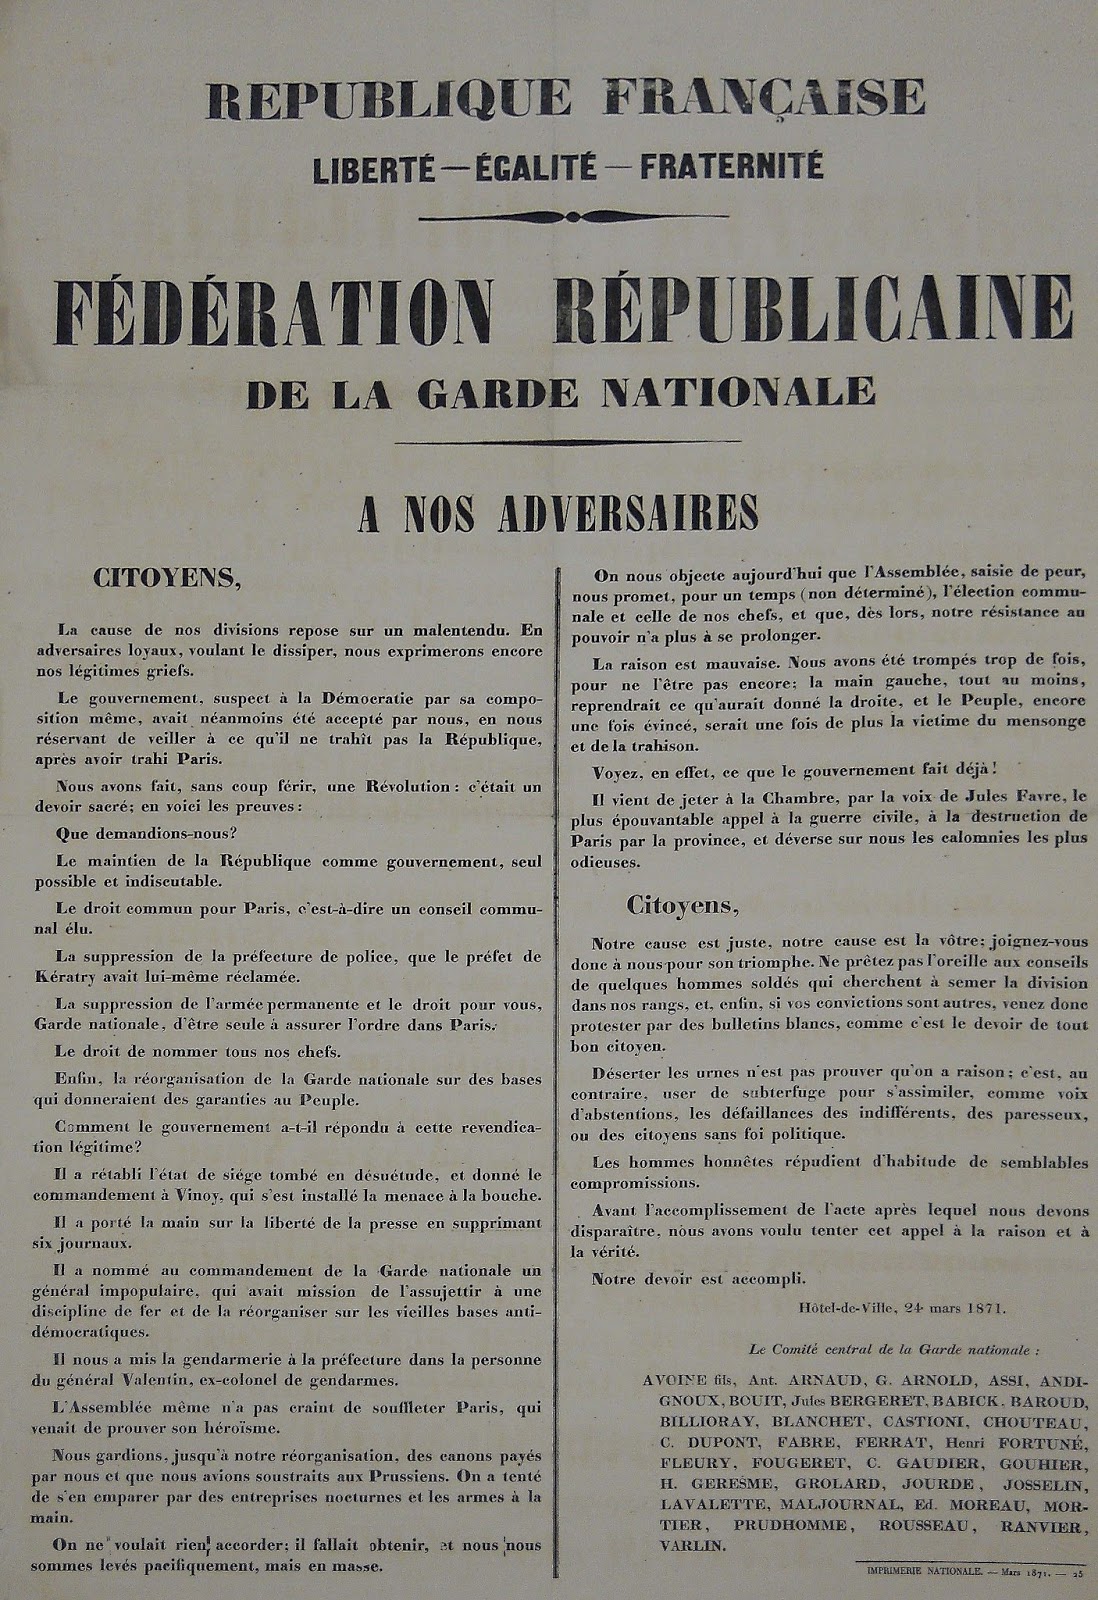 A poster displayed by the French Republic during the 1871 Paris Communer: Our Adversaries